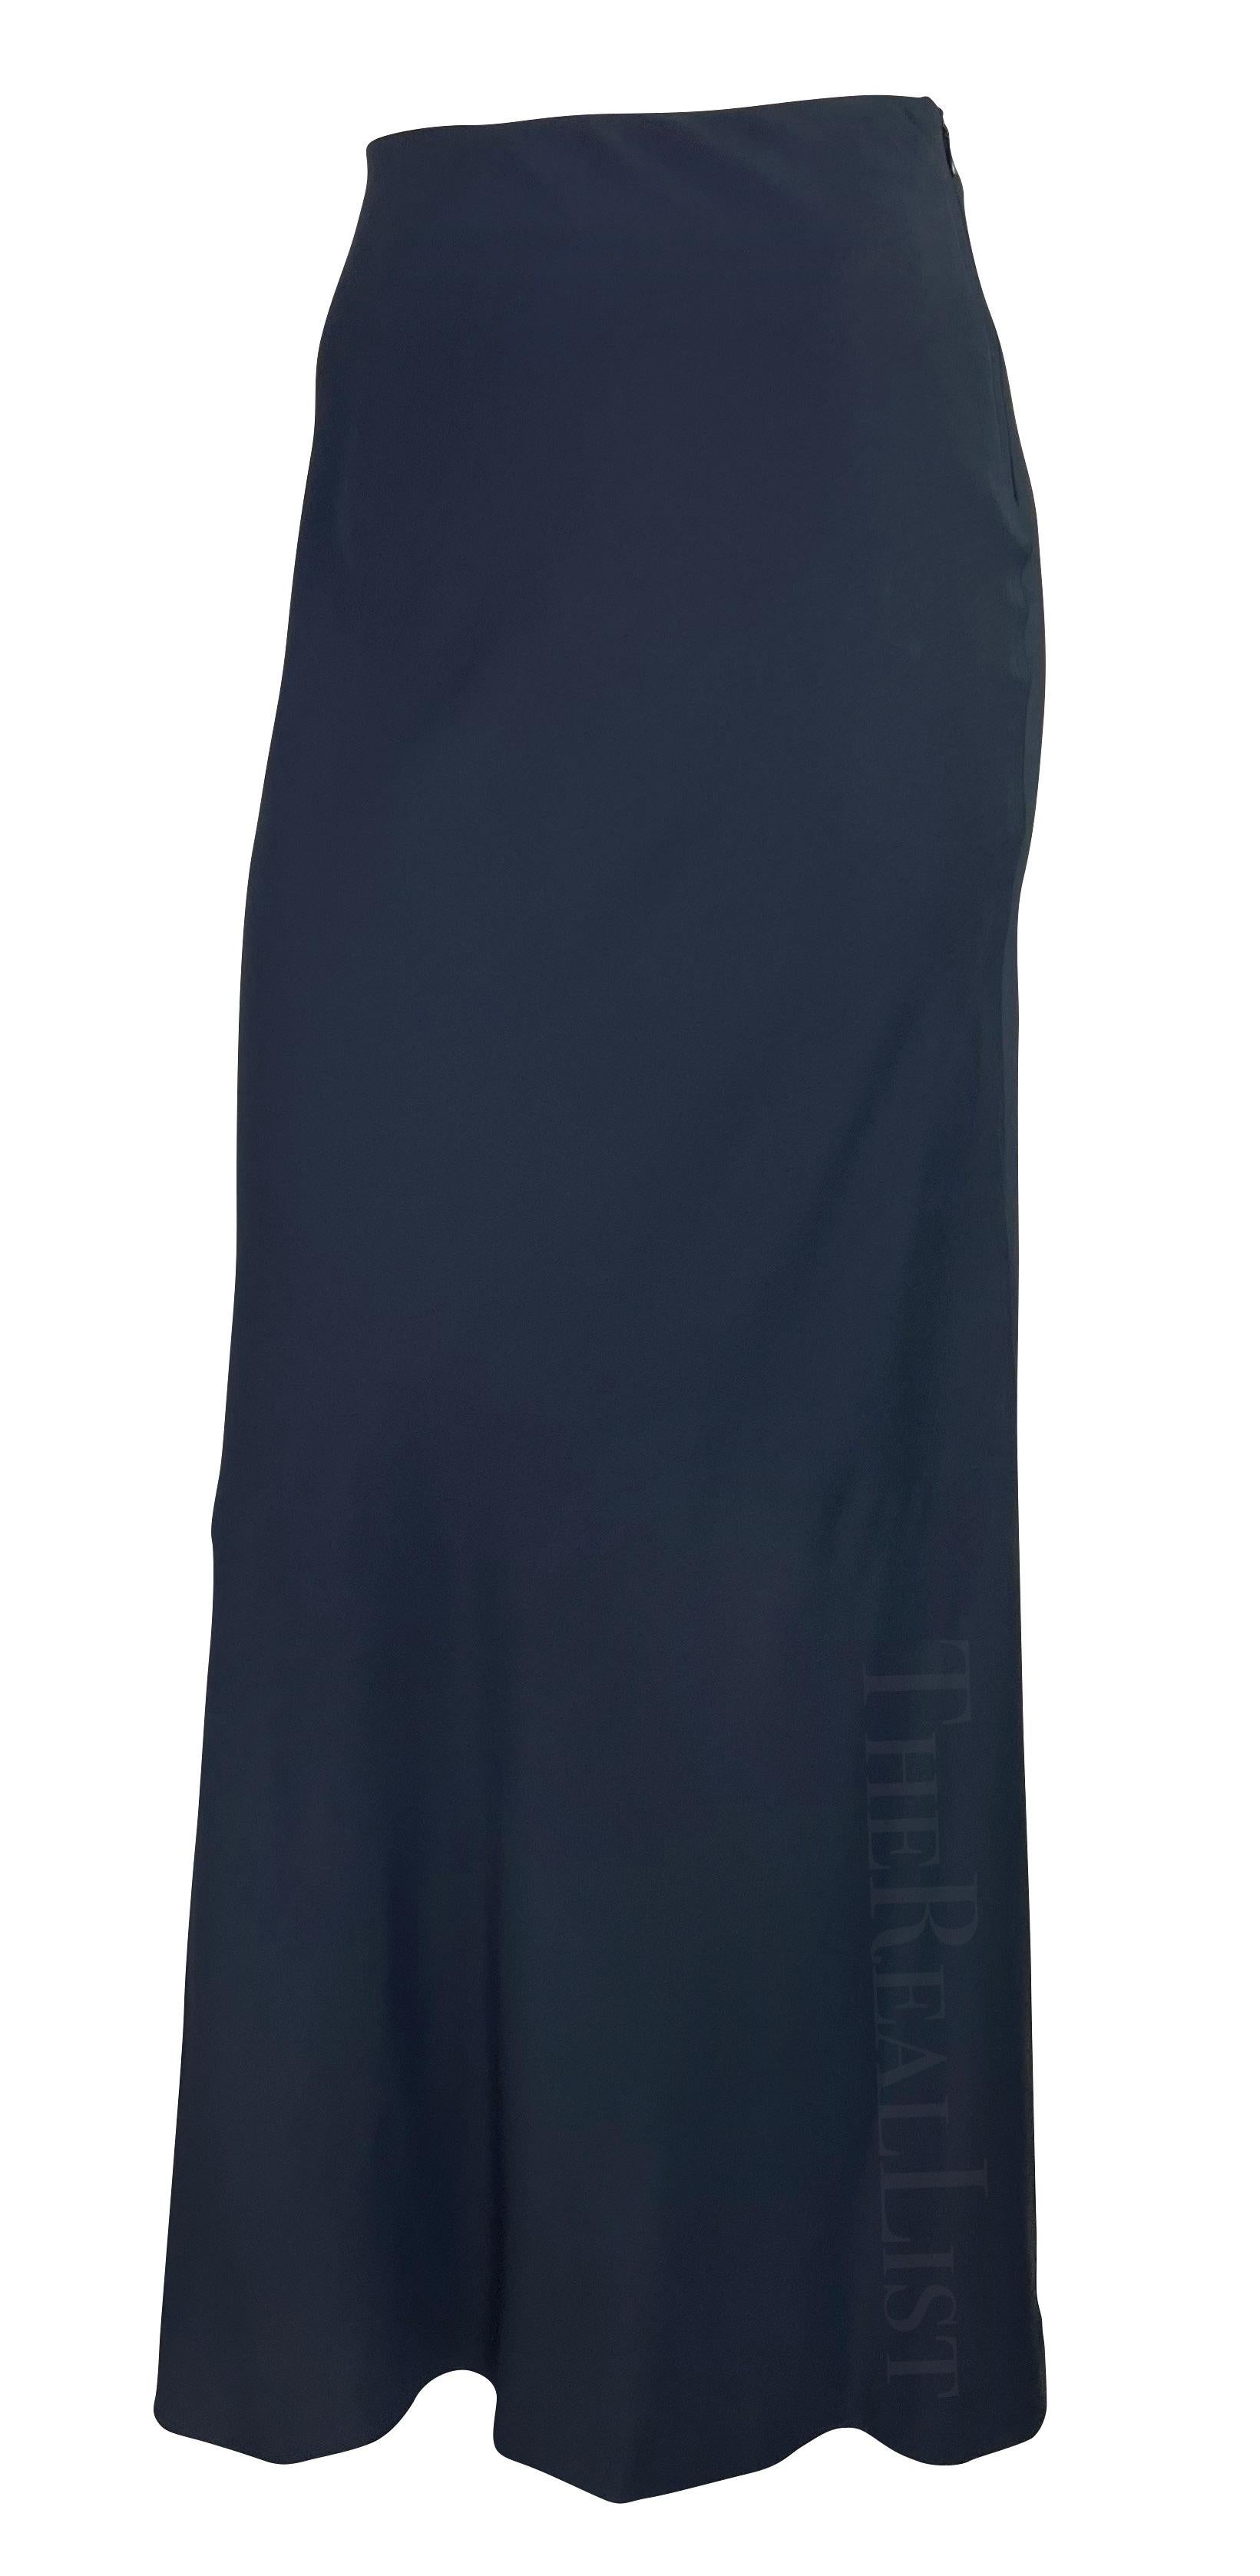 Presenting a stunning navy Gucci maxi skirt, designed by Tom Ford. From the Spring/Summer 1996 collection, this Tom Ford-designed piece fits perfectly at the hips before cascading into a flared cut. This gorgeous, unworn skirt still features its